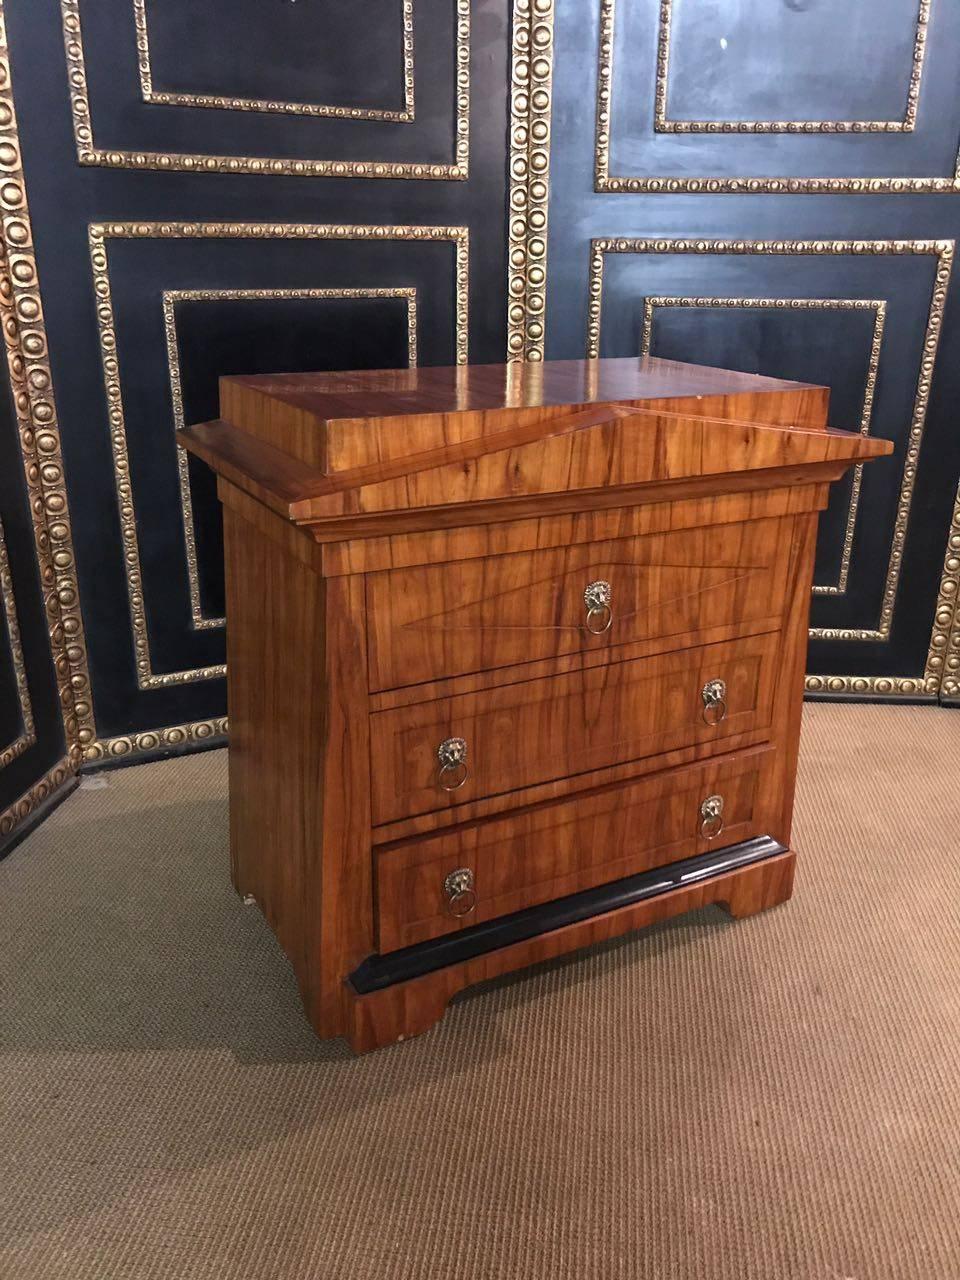 German Conical Chest of Drawers Commode shelve in antique Biedermeier Style mahogany